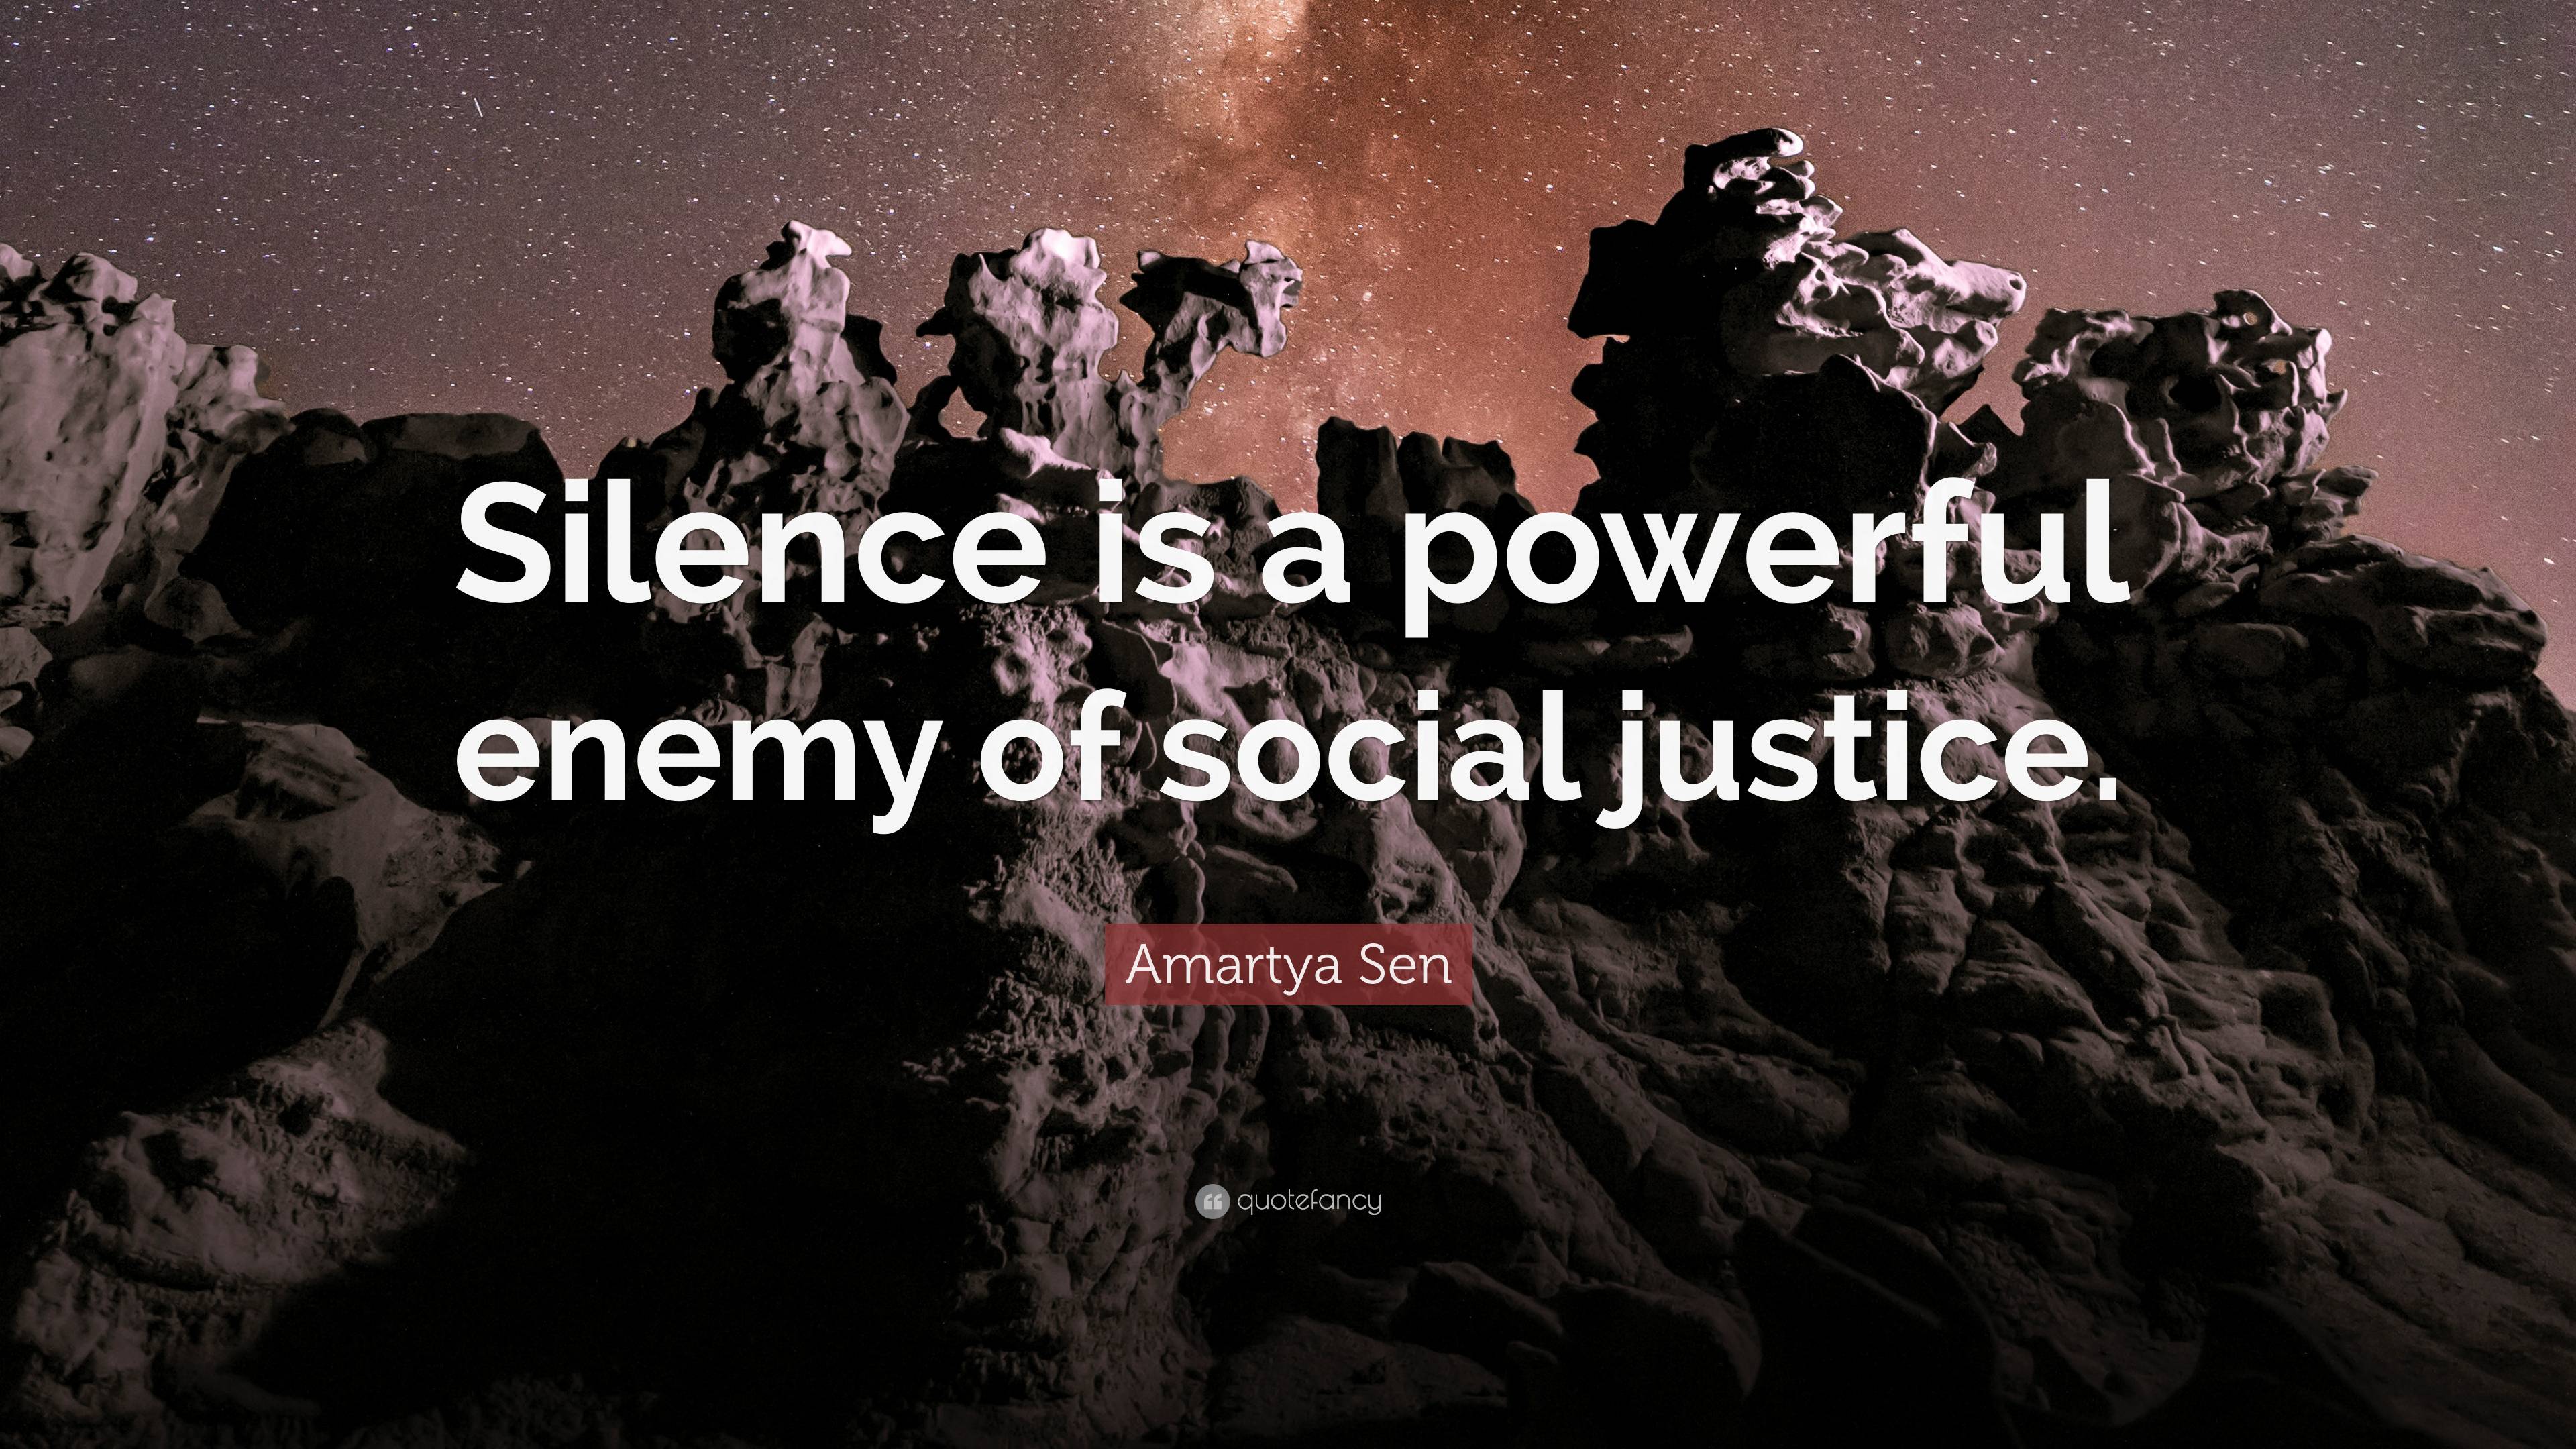 Amartya Sen Quote: “Silence is a powerful enemy of social justice.”